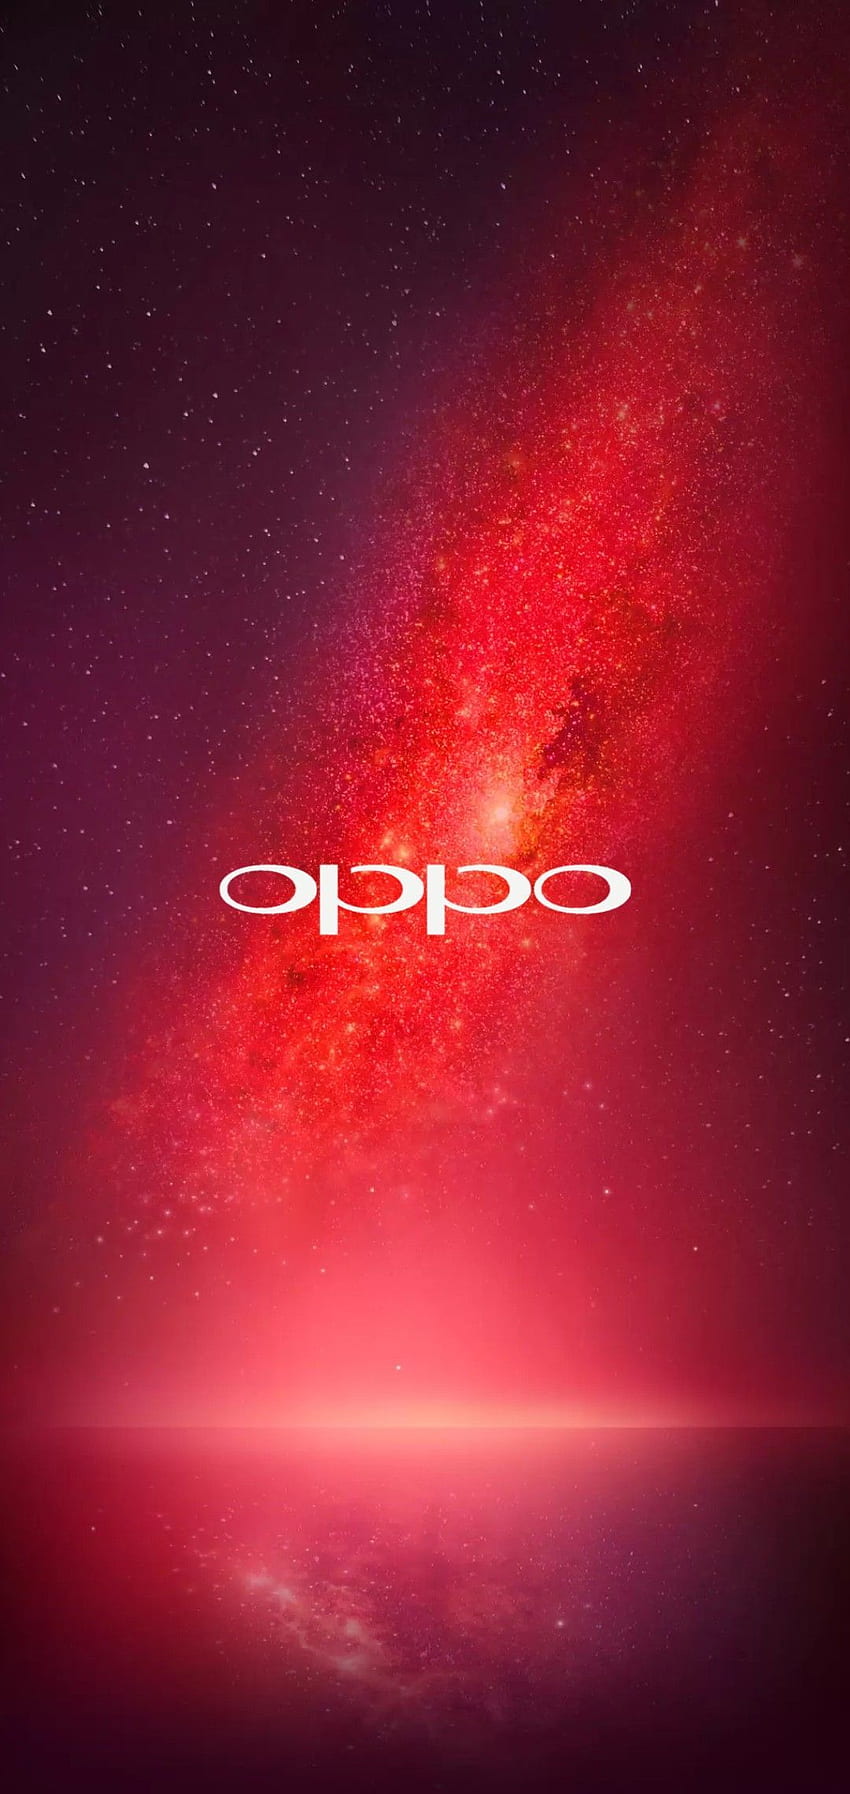 Original oppo space background. Background phone HD phone wallpaper | Pxfuel